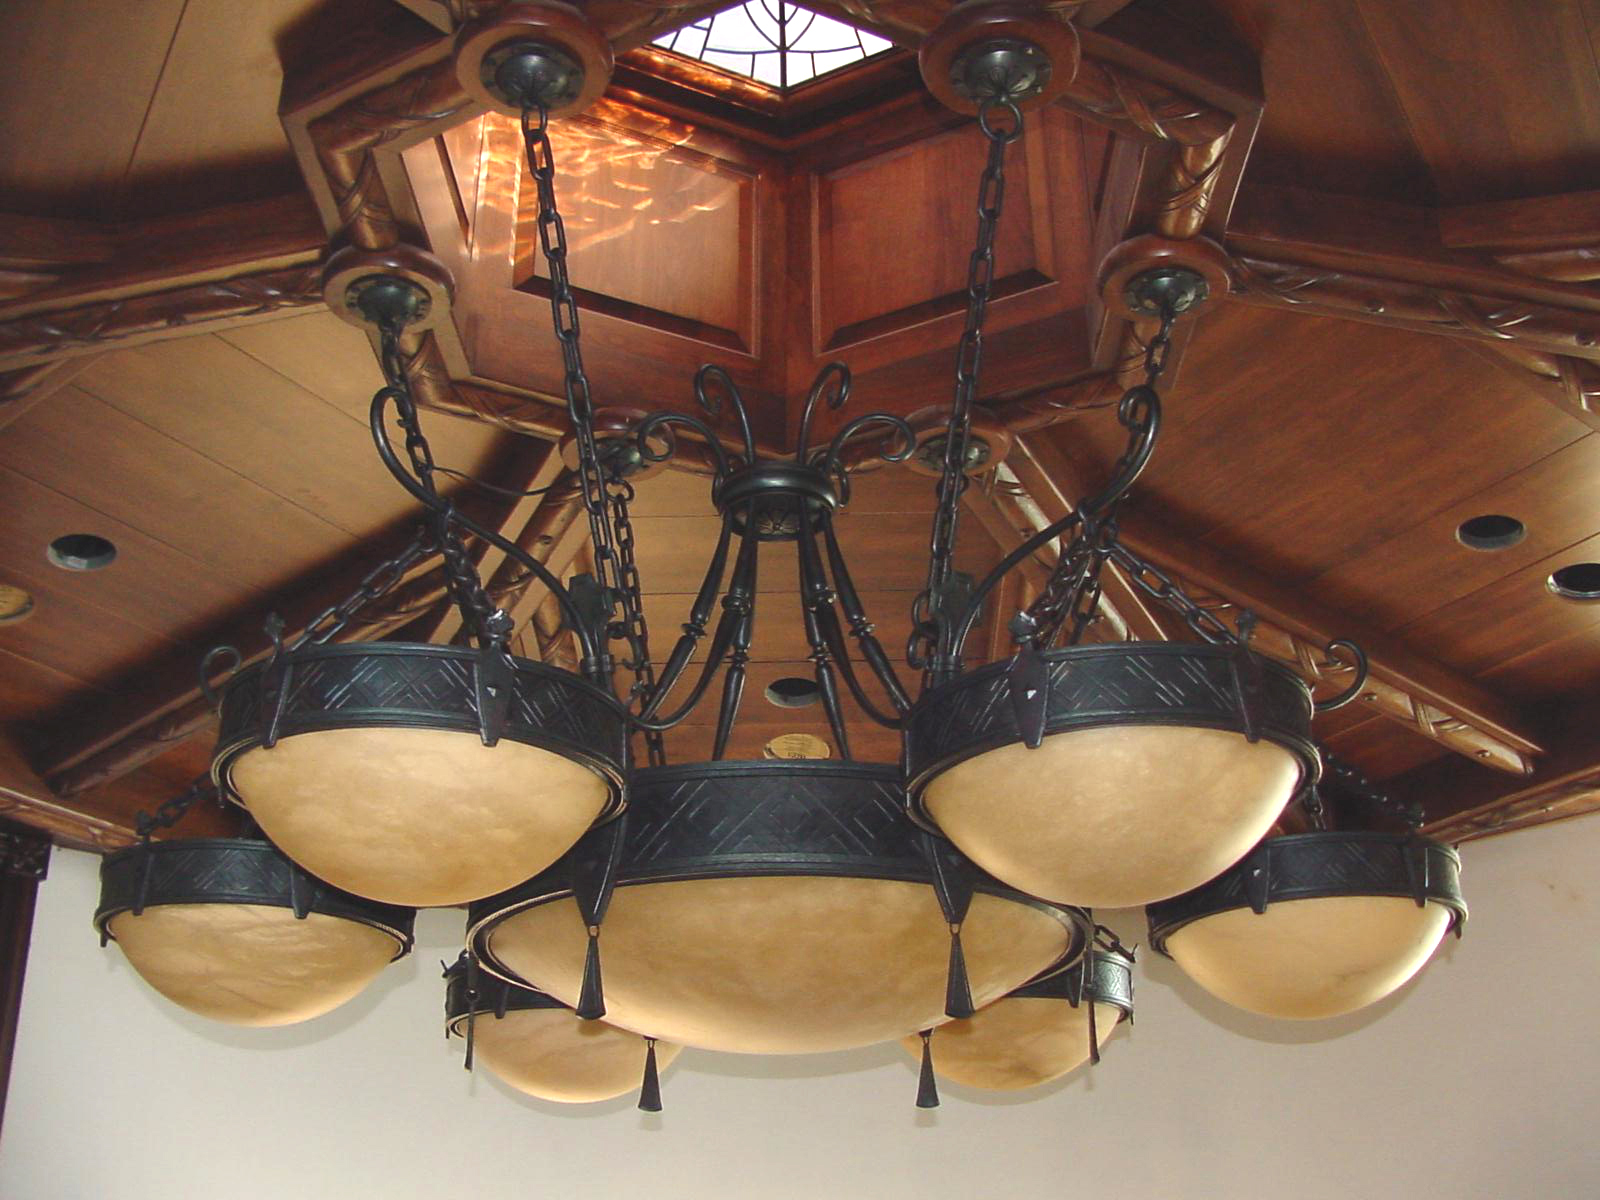 Grand Staircase Chandelier 8ft in diameter Entirely hand forged and chiseled by Chad Gunter. Alabaster bowls; aprox 350 lbs. Design by Morrelli.